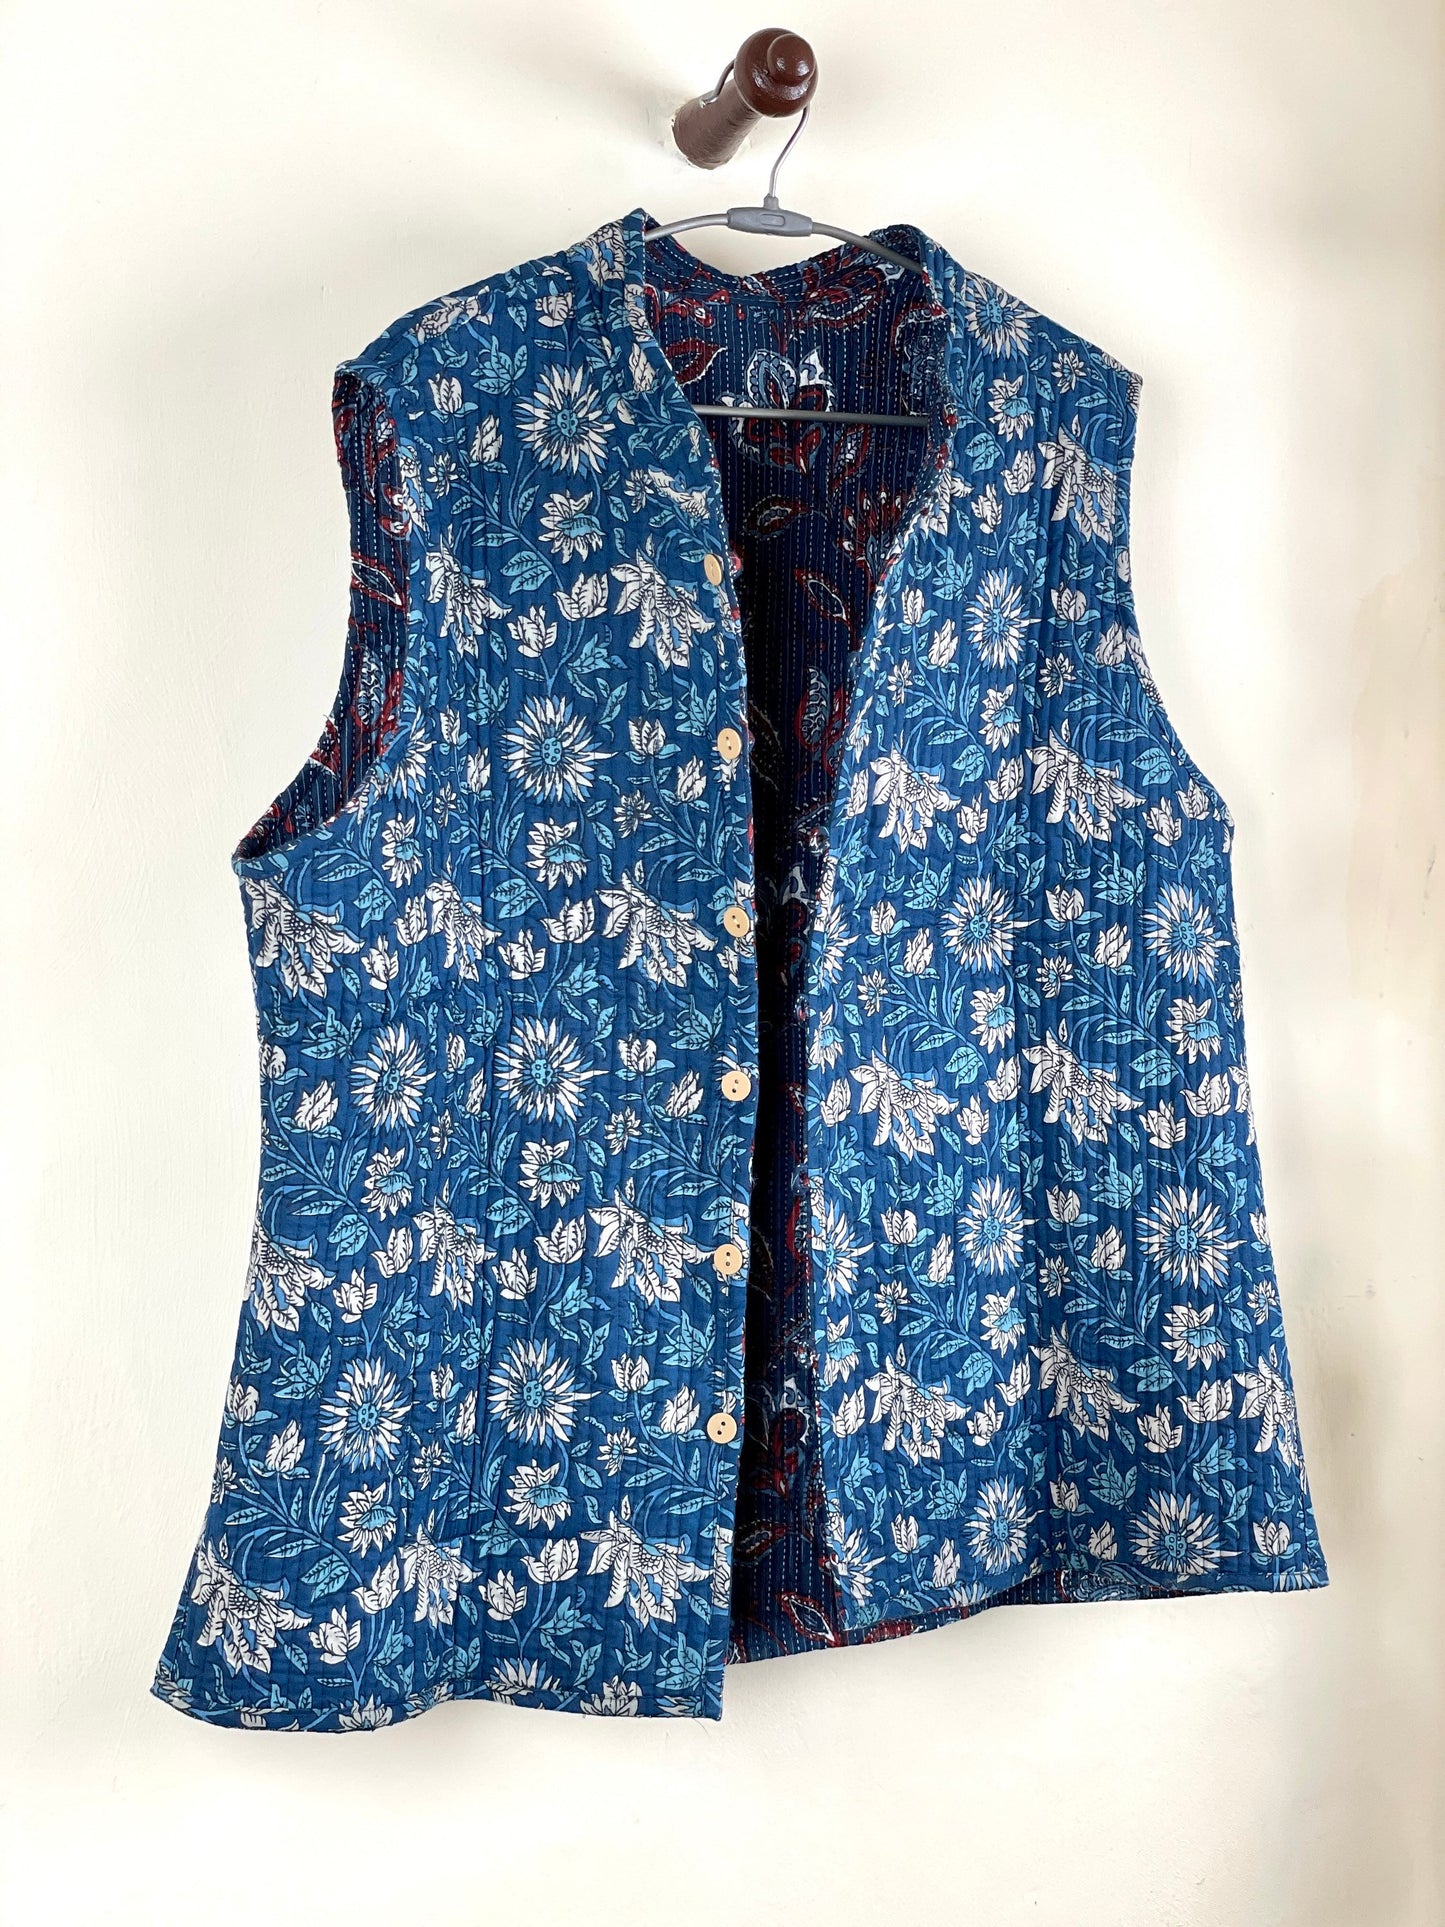 Indian Handmade Quilted Cotton Sleeveless Jacket Blue & Red Stylish Women's Vest, Reversible Waistcoat for Her